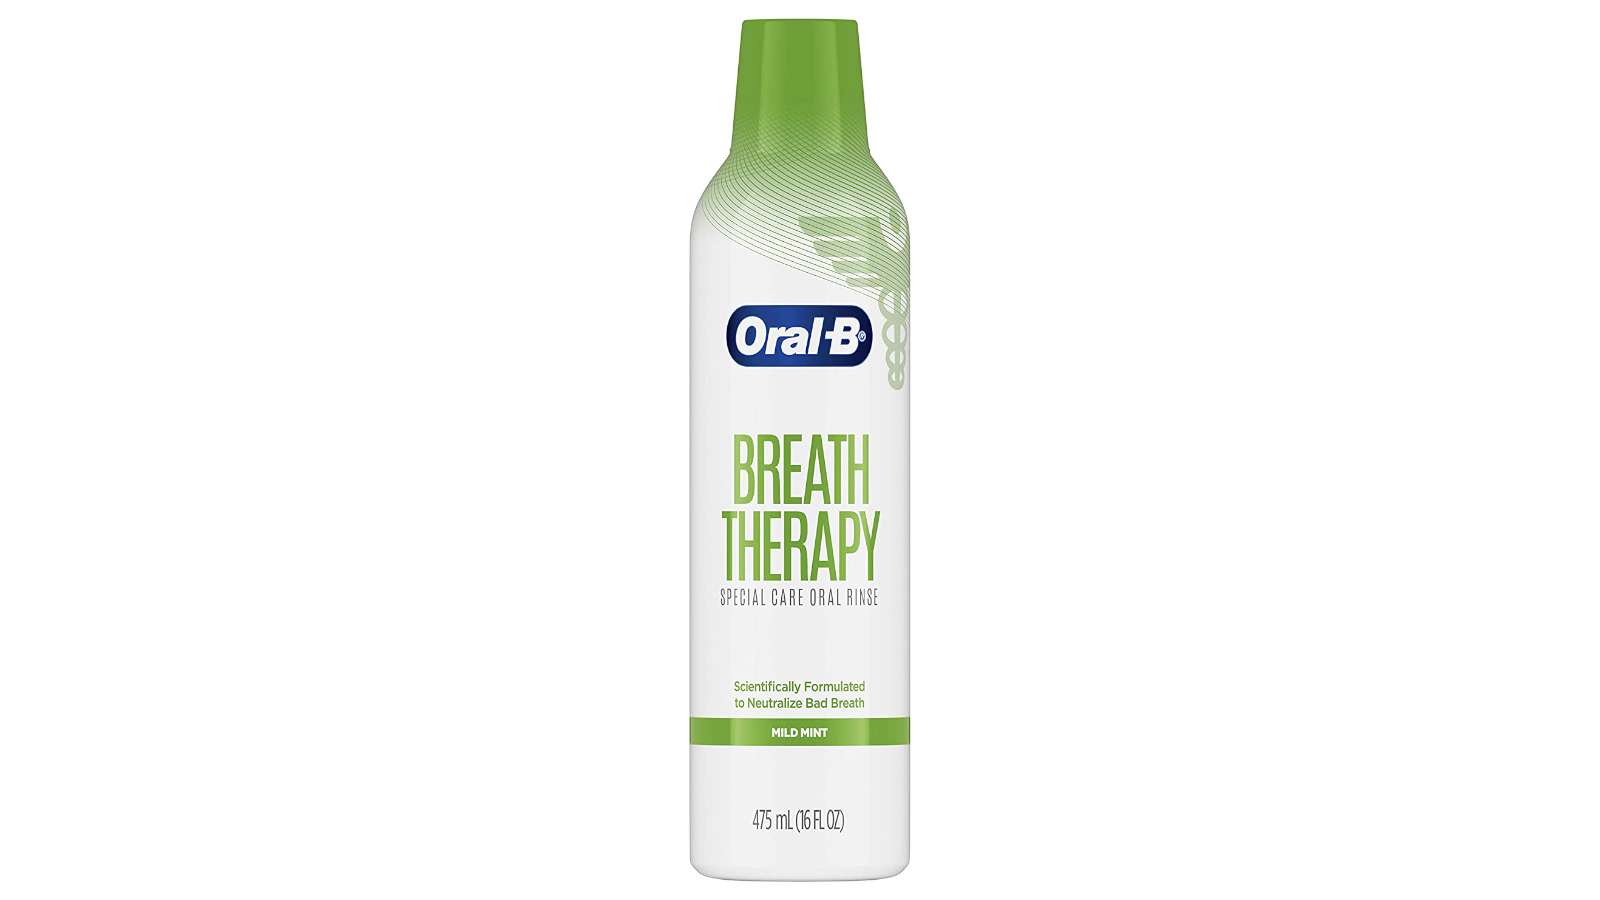 bad breath mouthwashes reviews - bottle of oral-b breath therapy mouthwash special care oral rinse, 16 fl oz